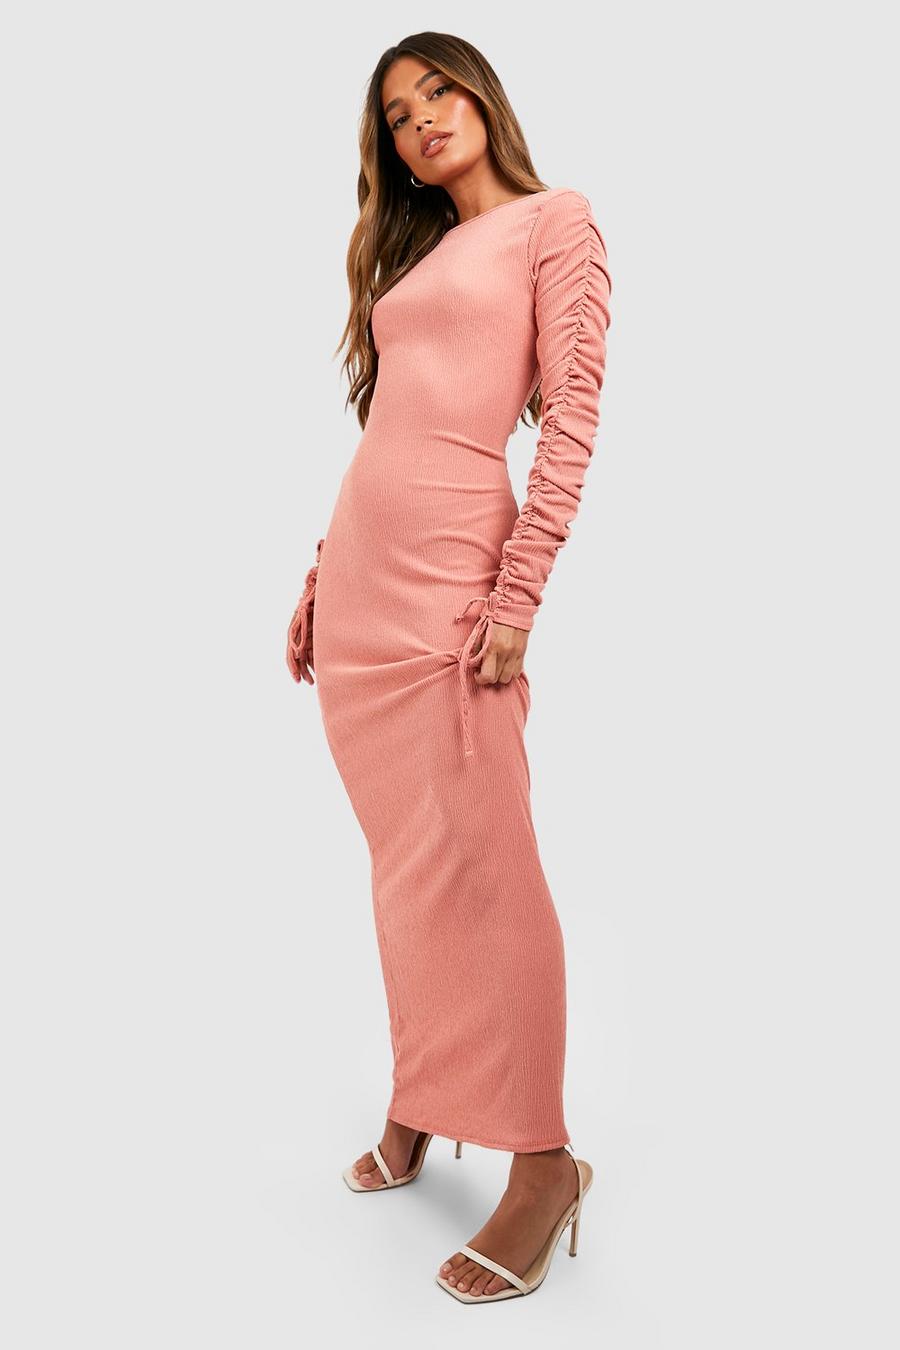 Camel Textured Long Sleeve Rouched Maxi Dress